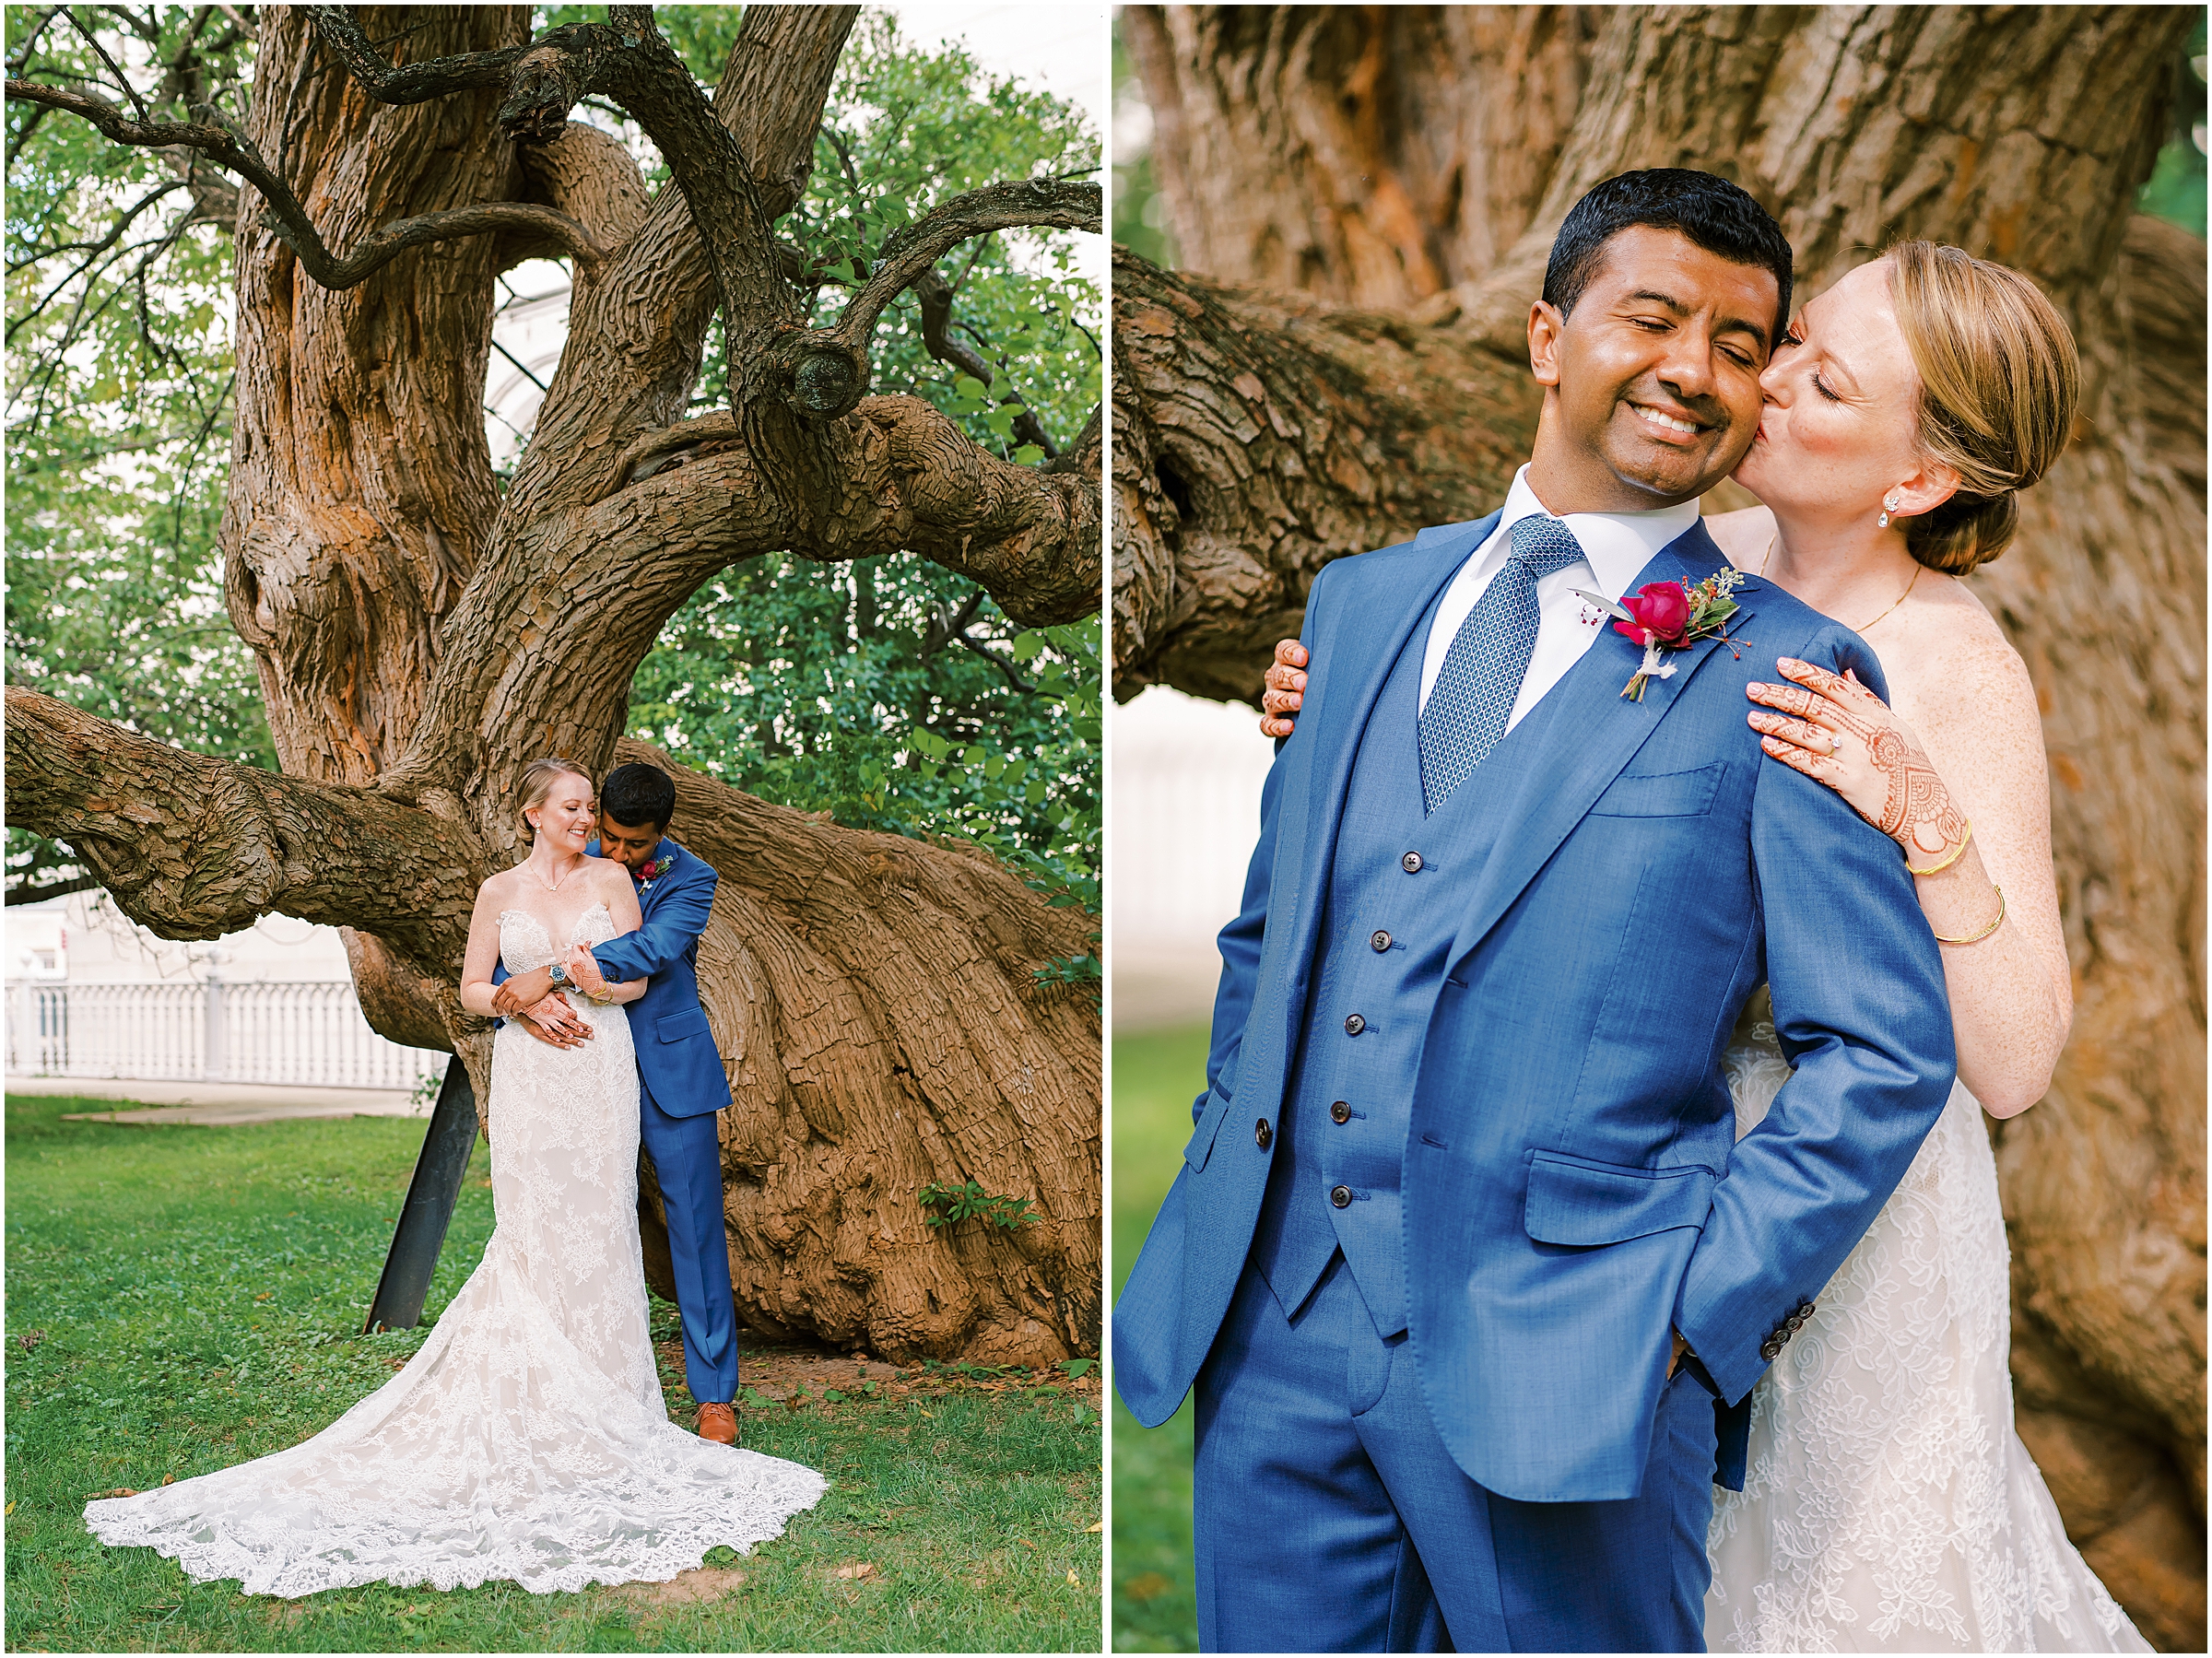 Bride and groom portrait in front of tree